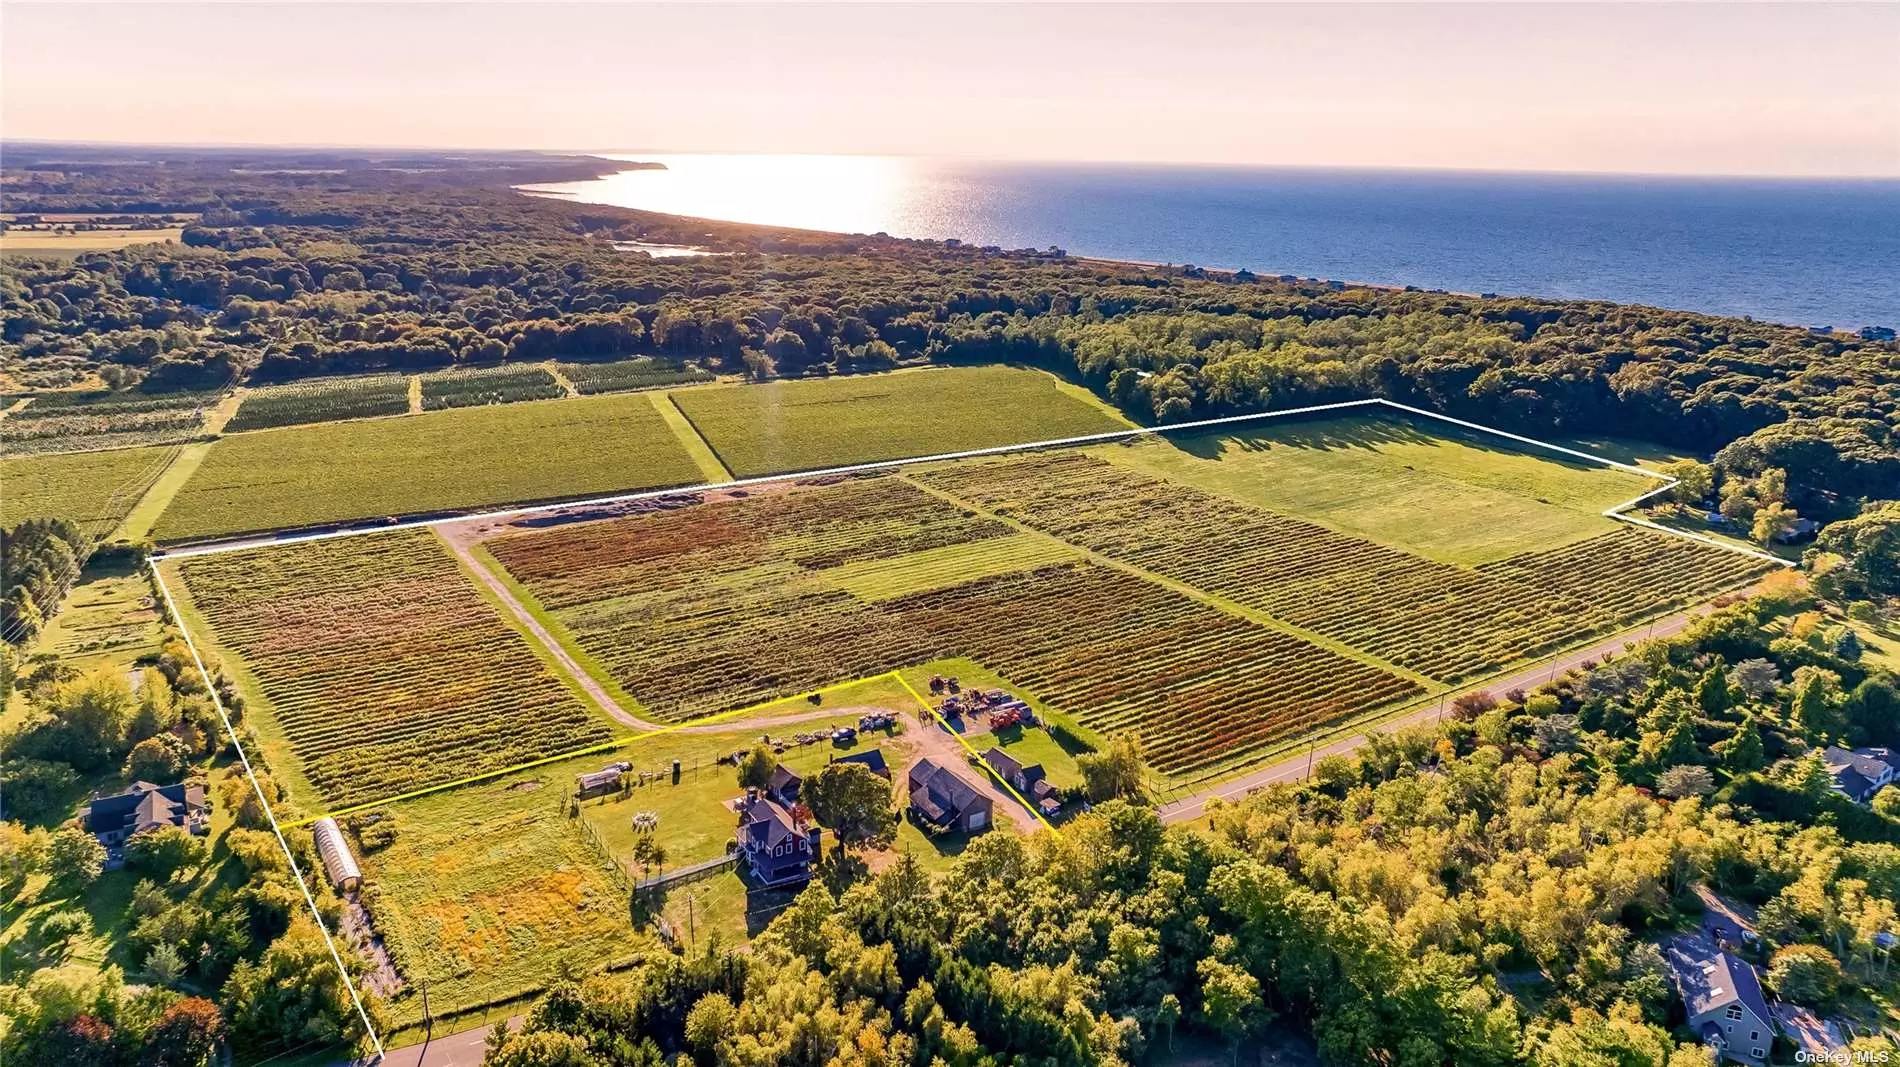 Southold, North Fork: Over 30 acres of active farmland planted with nearly 40, 000 blueberry bushes and approximately 10 acres of fallow, open farmland for expansion or other agricultural uses... well cared for farmhouse and barns on approximately 1.83 acres just up from Horton&rsquo;s Lane Beaches/Horton&rsquo;s Point on the LI Sound. Sublime setting just moments to village amenities. Pursue your agricultural desires today and establish your North Fork legacy.